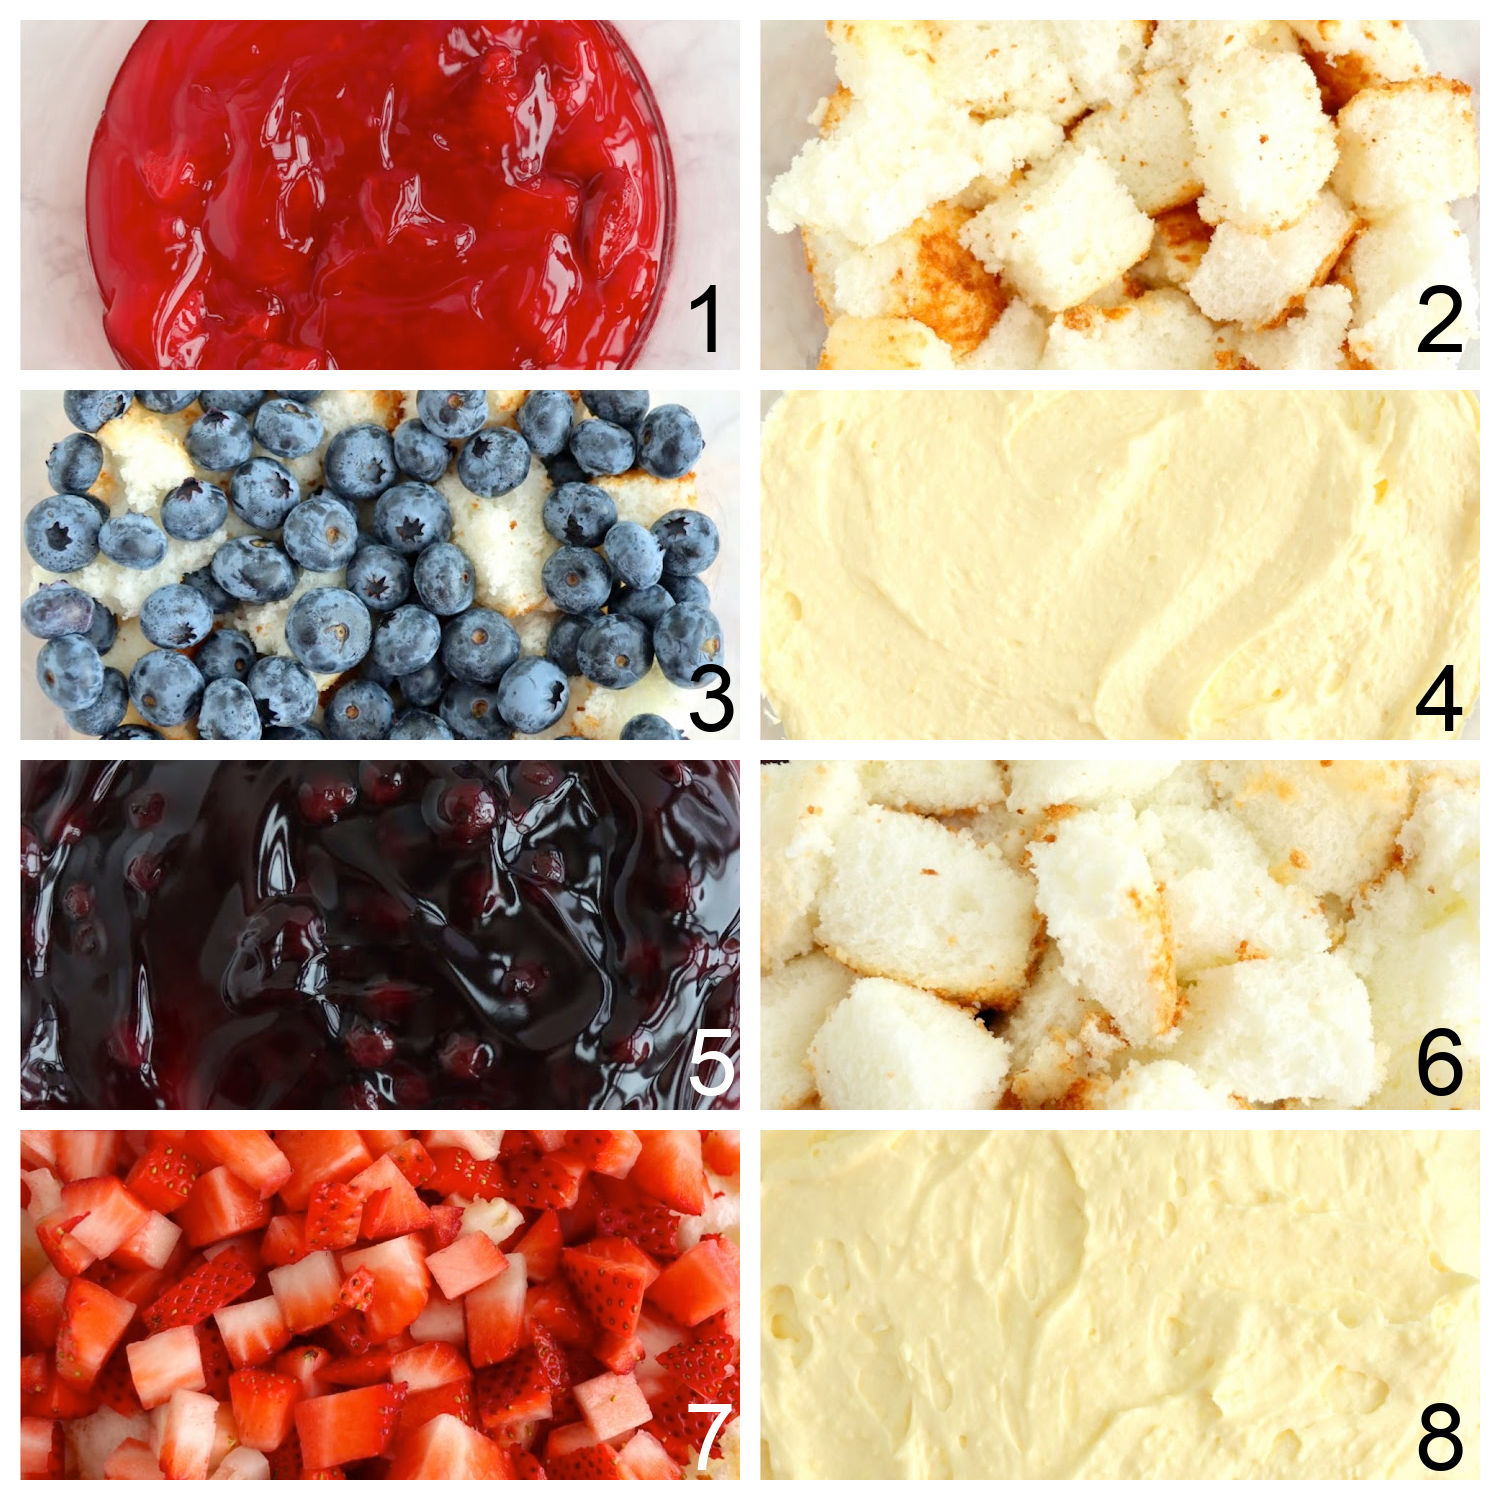 steps for making a red, white and blue trifle